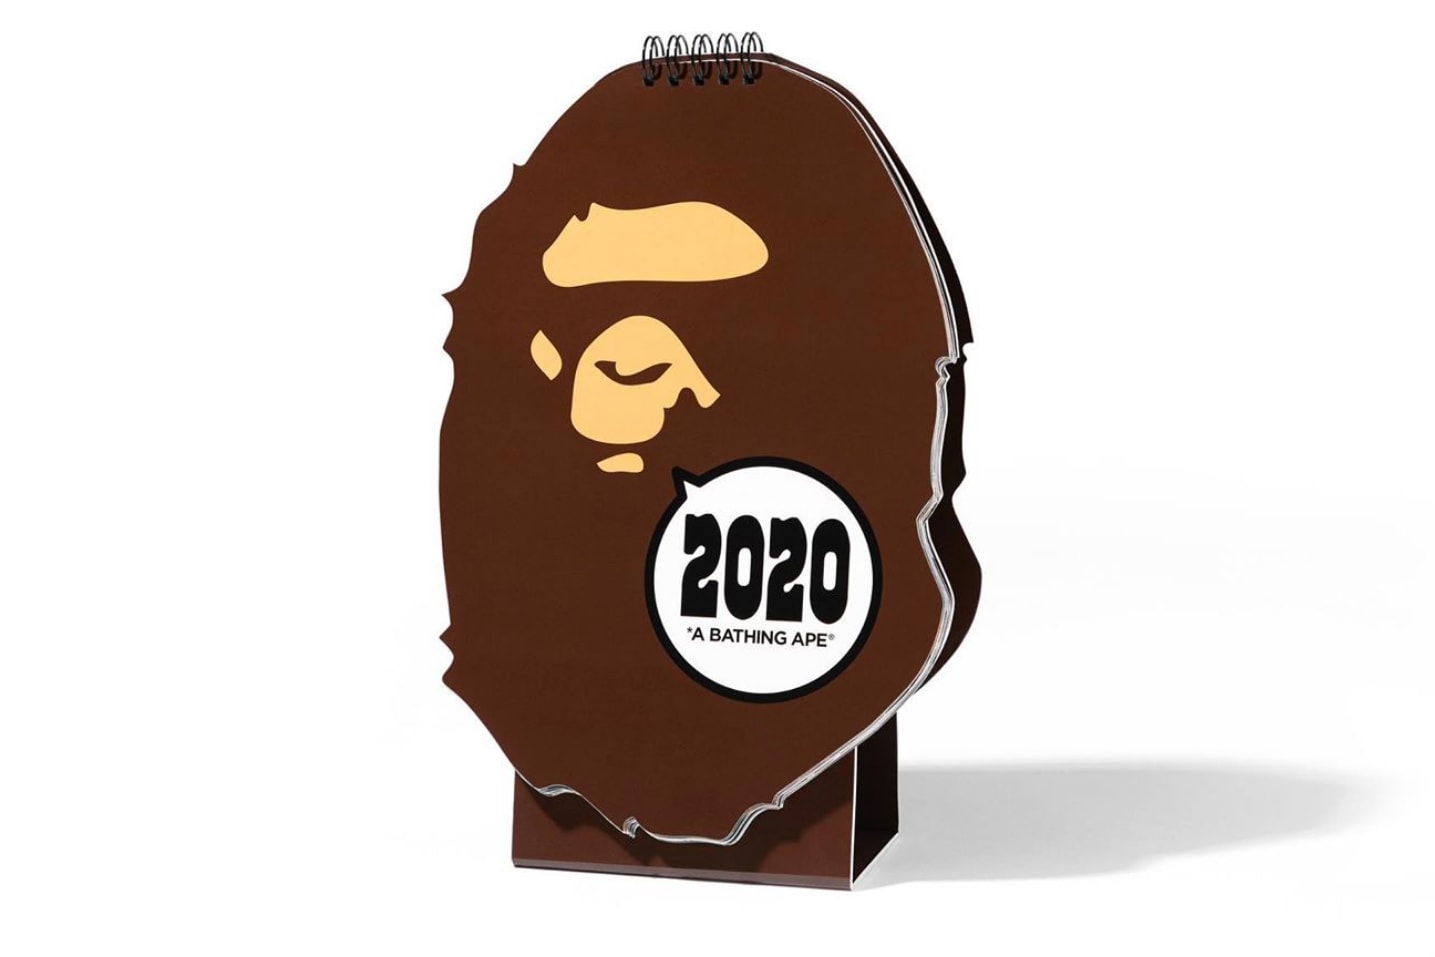 BAPE Drops Exclusive New Year Gifts 2020 Chinese new year a bathing ape calendar candy box red pocket envelopes shark face hoodie accessories collectibles 